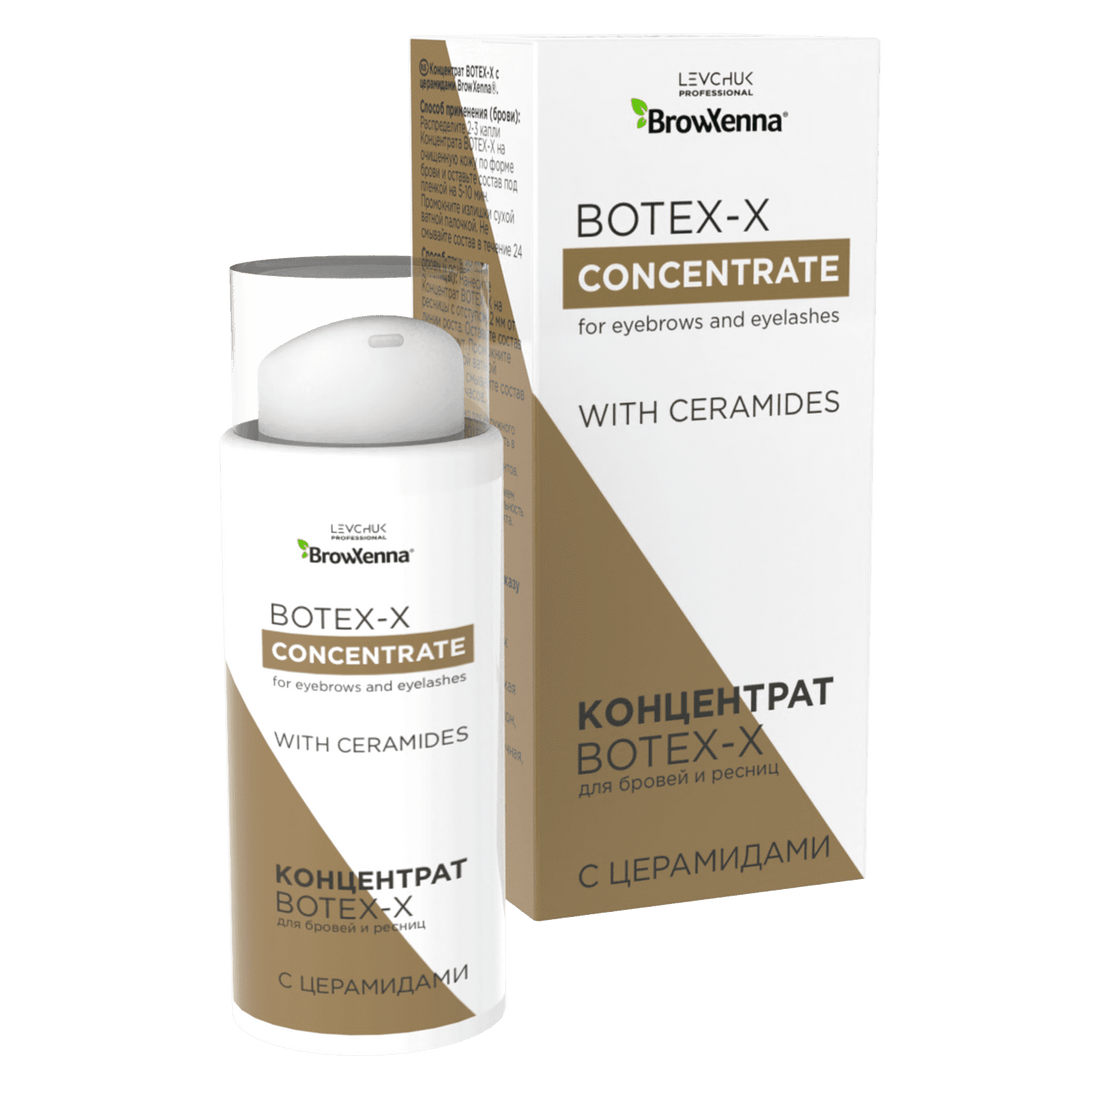 BROW XENNA - BOTEX-X Concentrate With Ceramides